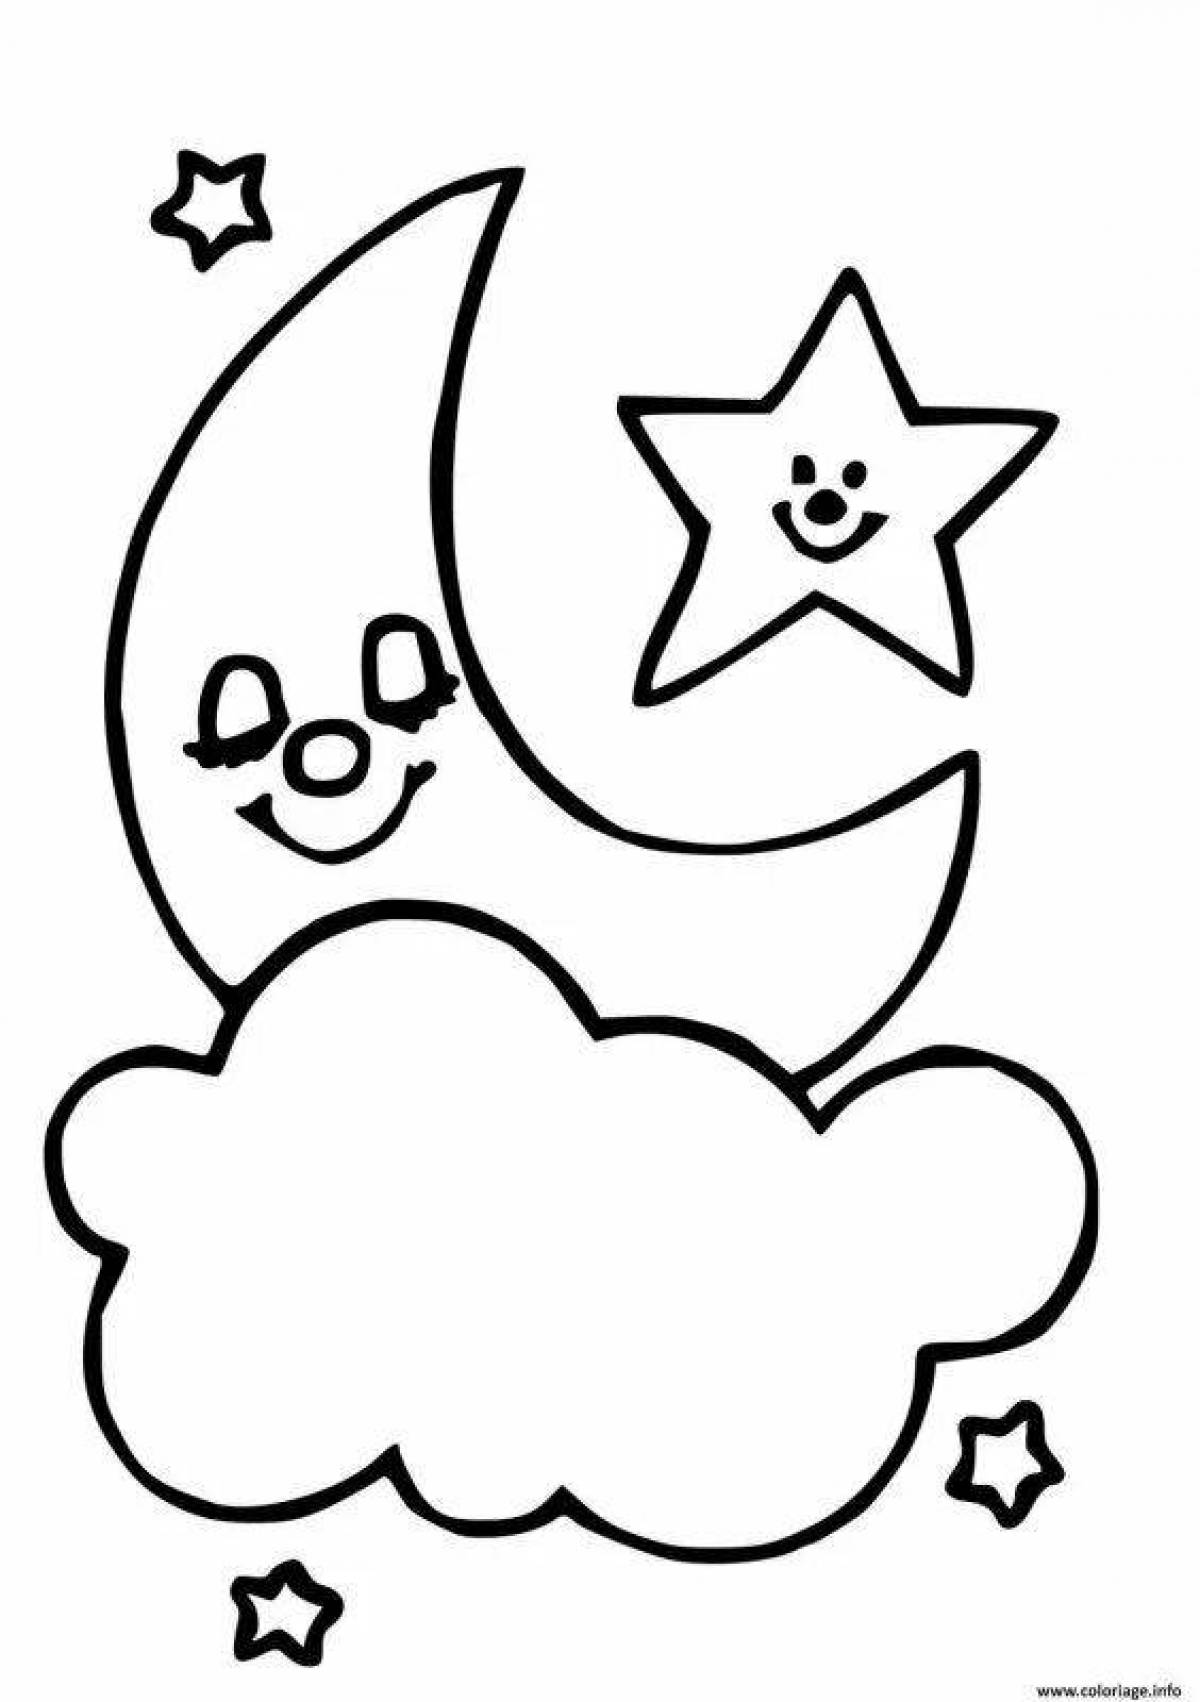 Shining moon coloring book for kids